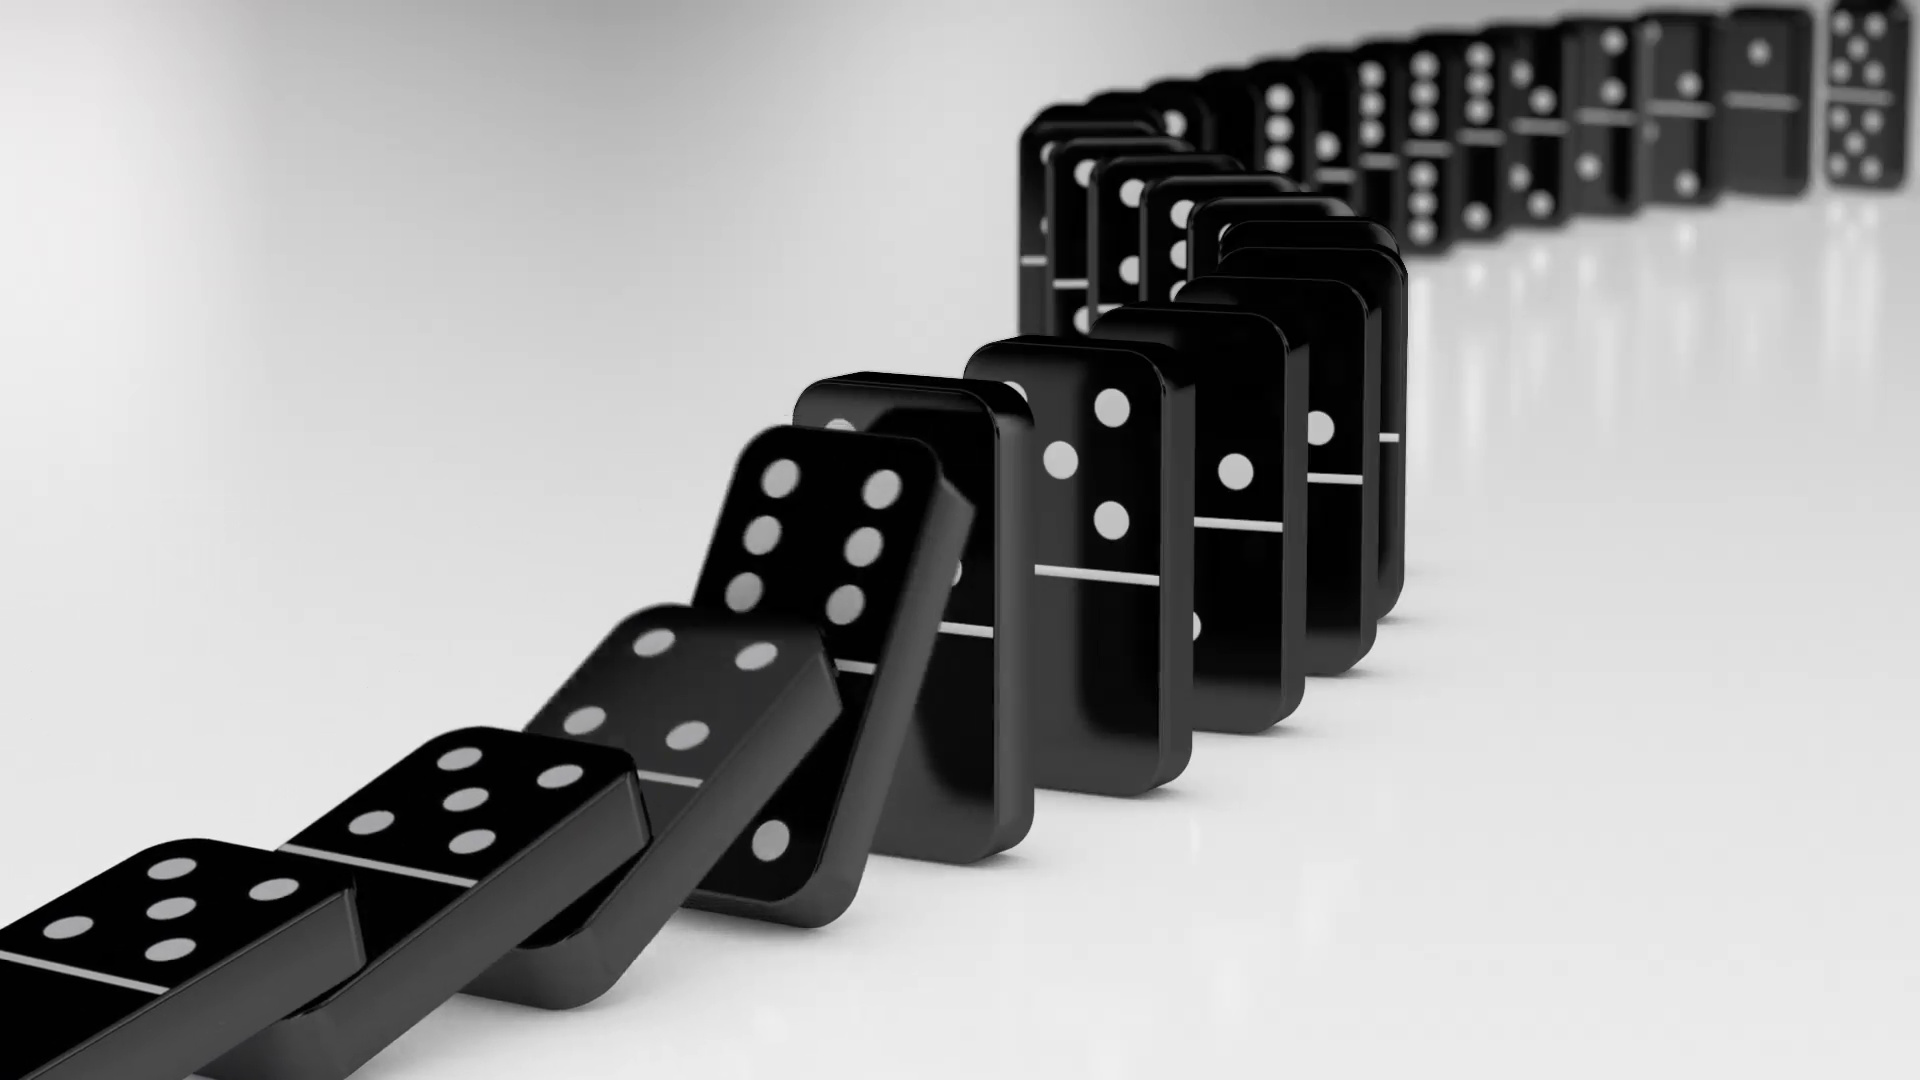 Dominoes: The chain reaction, A popular term that reflects the chain of events happening one after another, Mexican train. 1920x1080 Full HD Wallpaper.